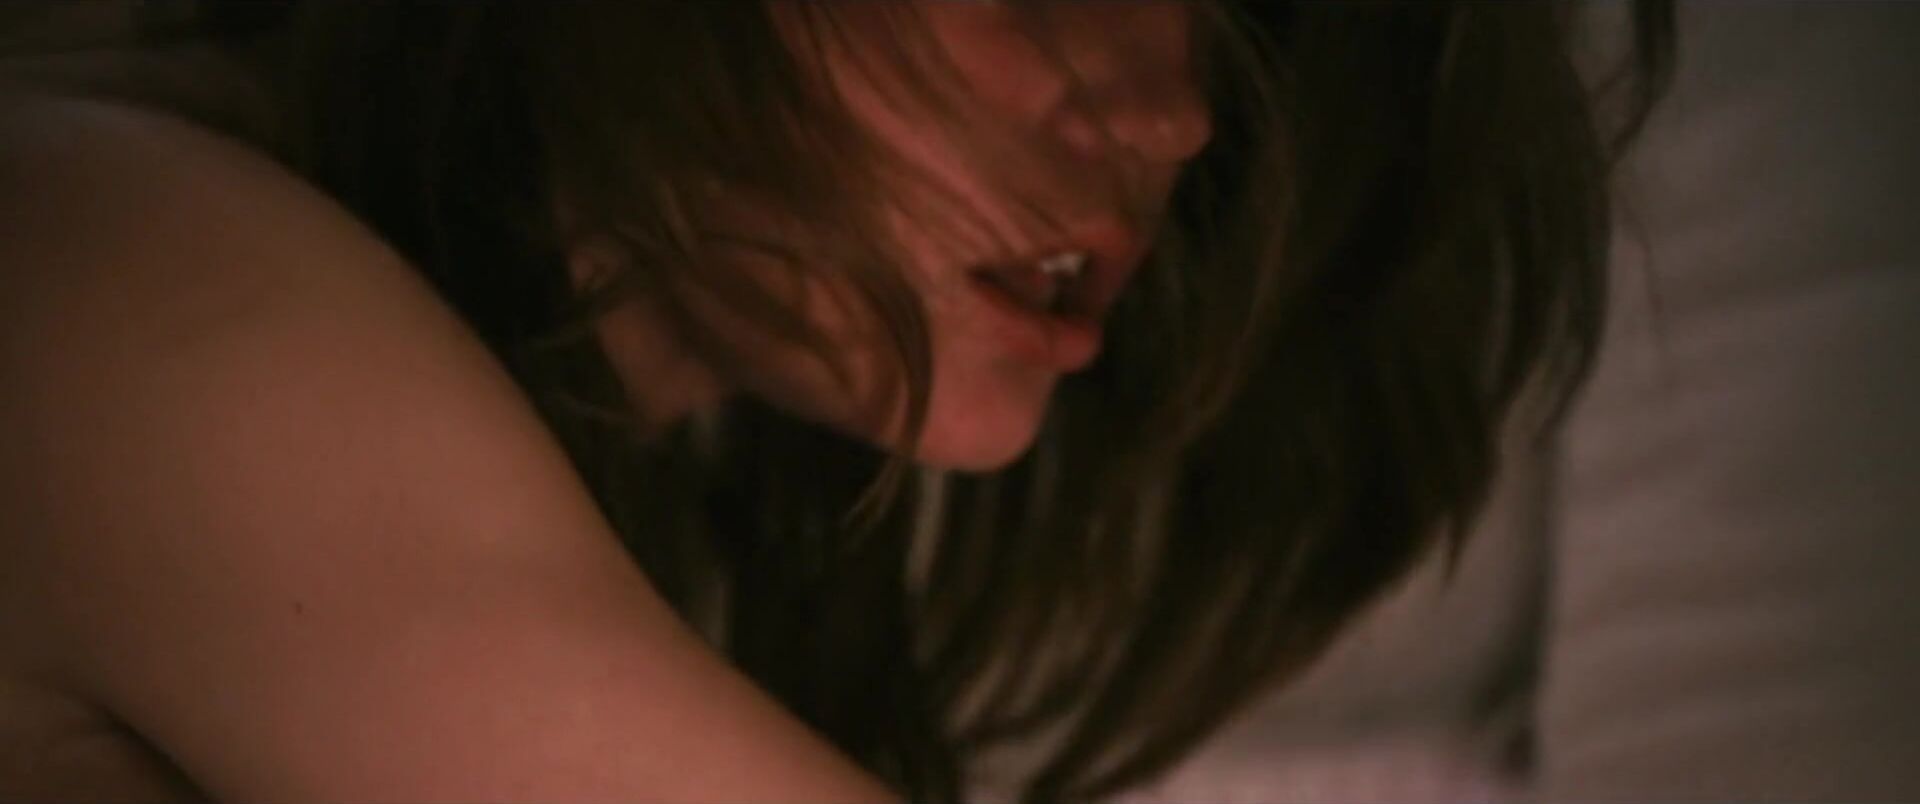 Shecock Adele Exarchopoulos and Lea Seydoux don't fantasize about nailing pussies but do it Rico